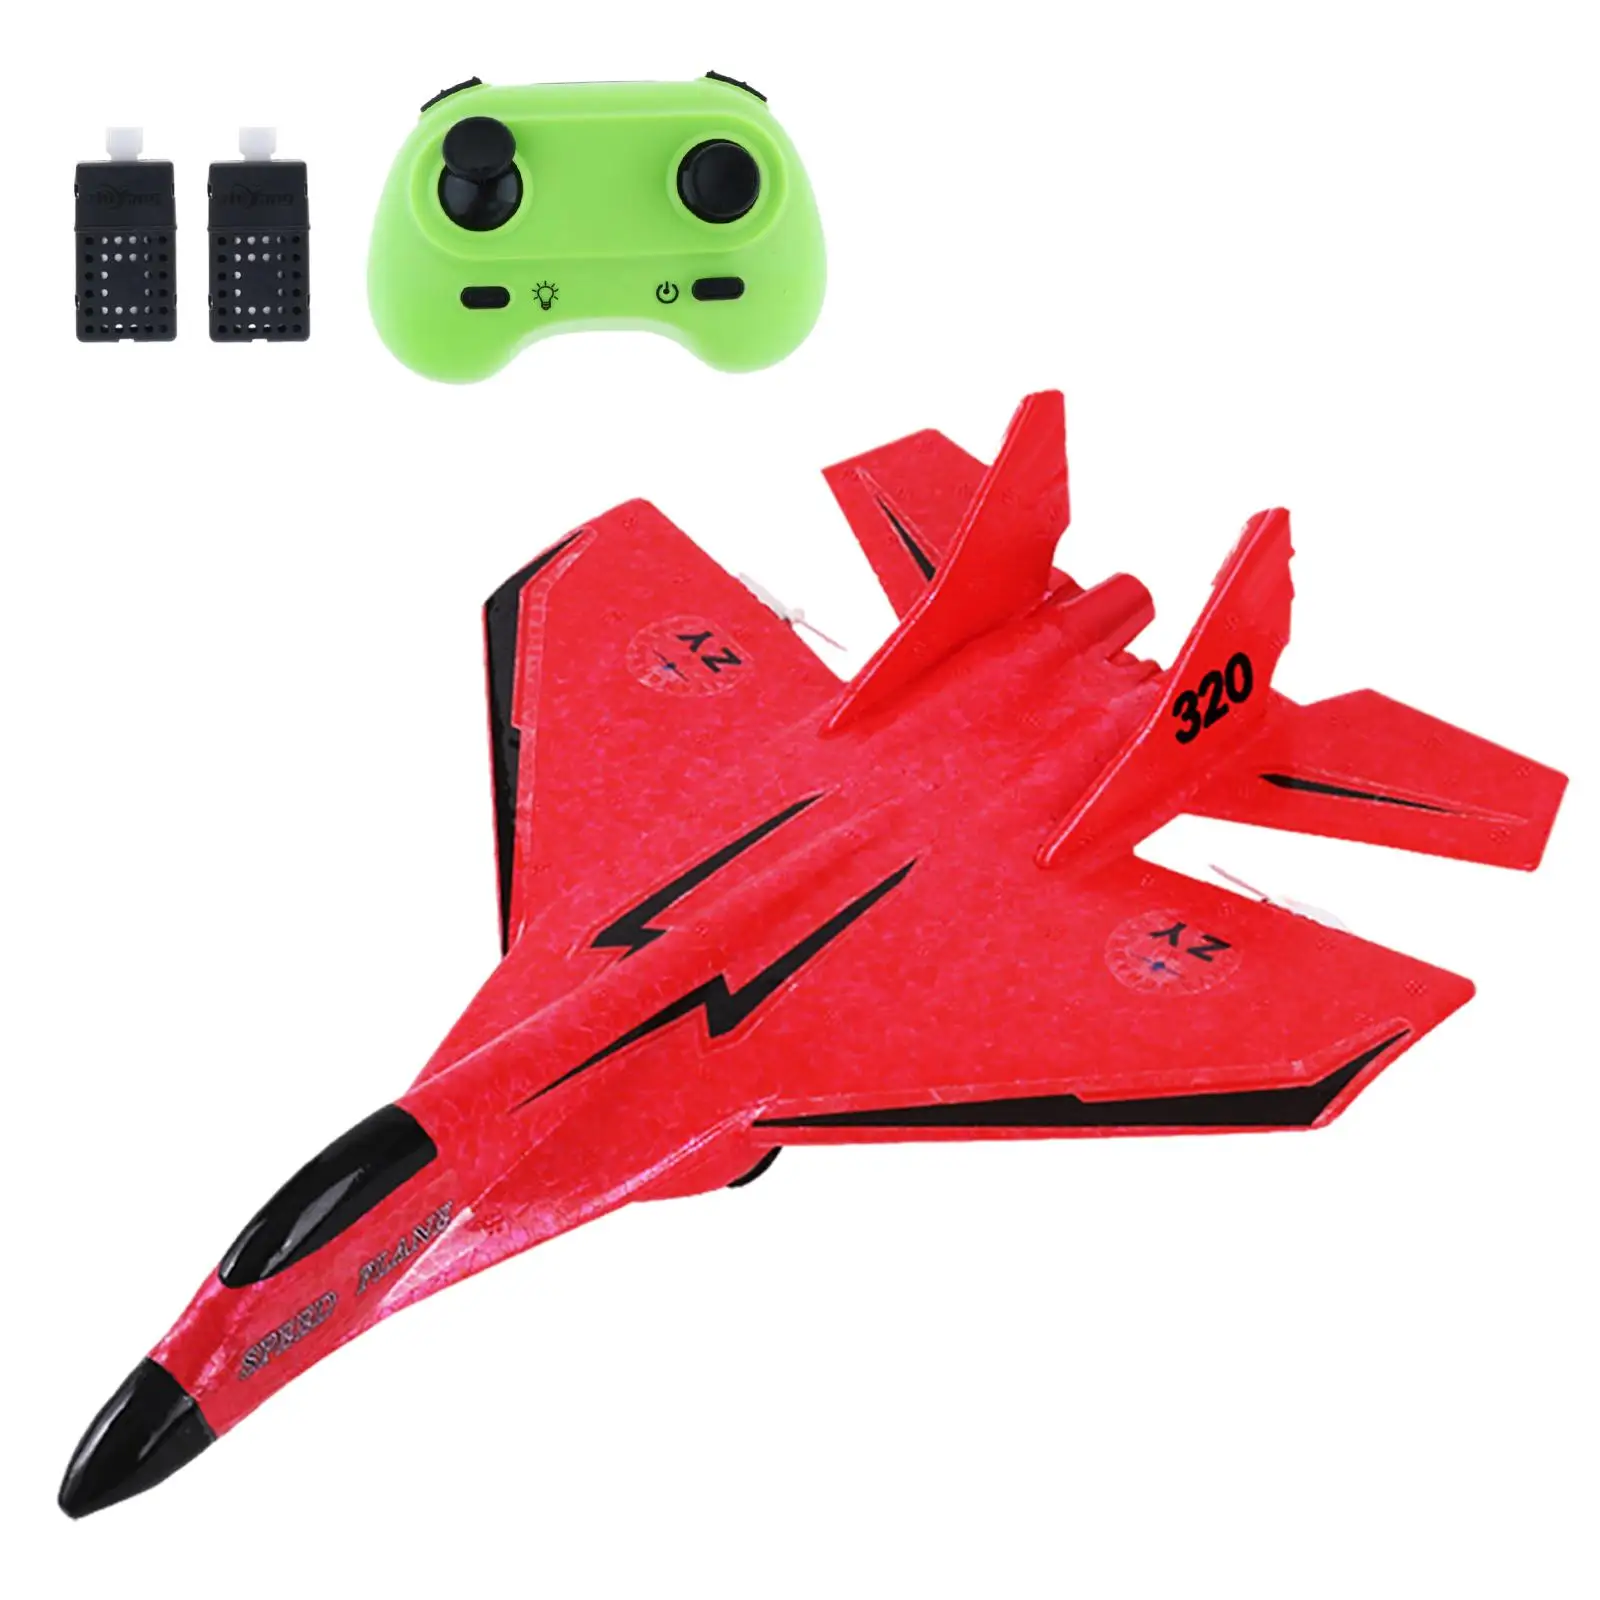 RC Plane Lightweight Easy to Control with Light Foam RC Airplane RC Glider Aircraft Jet Fighter Toys for Beginner Boys Girls